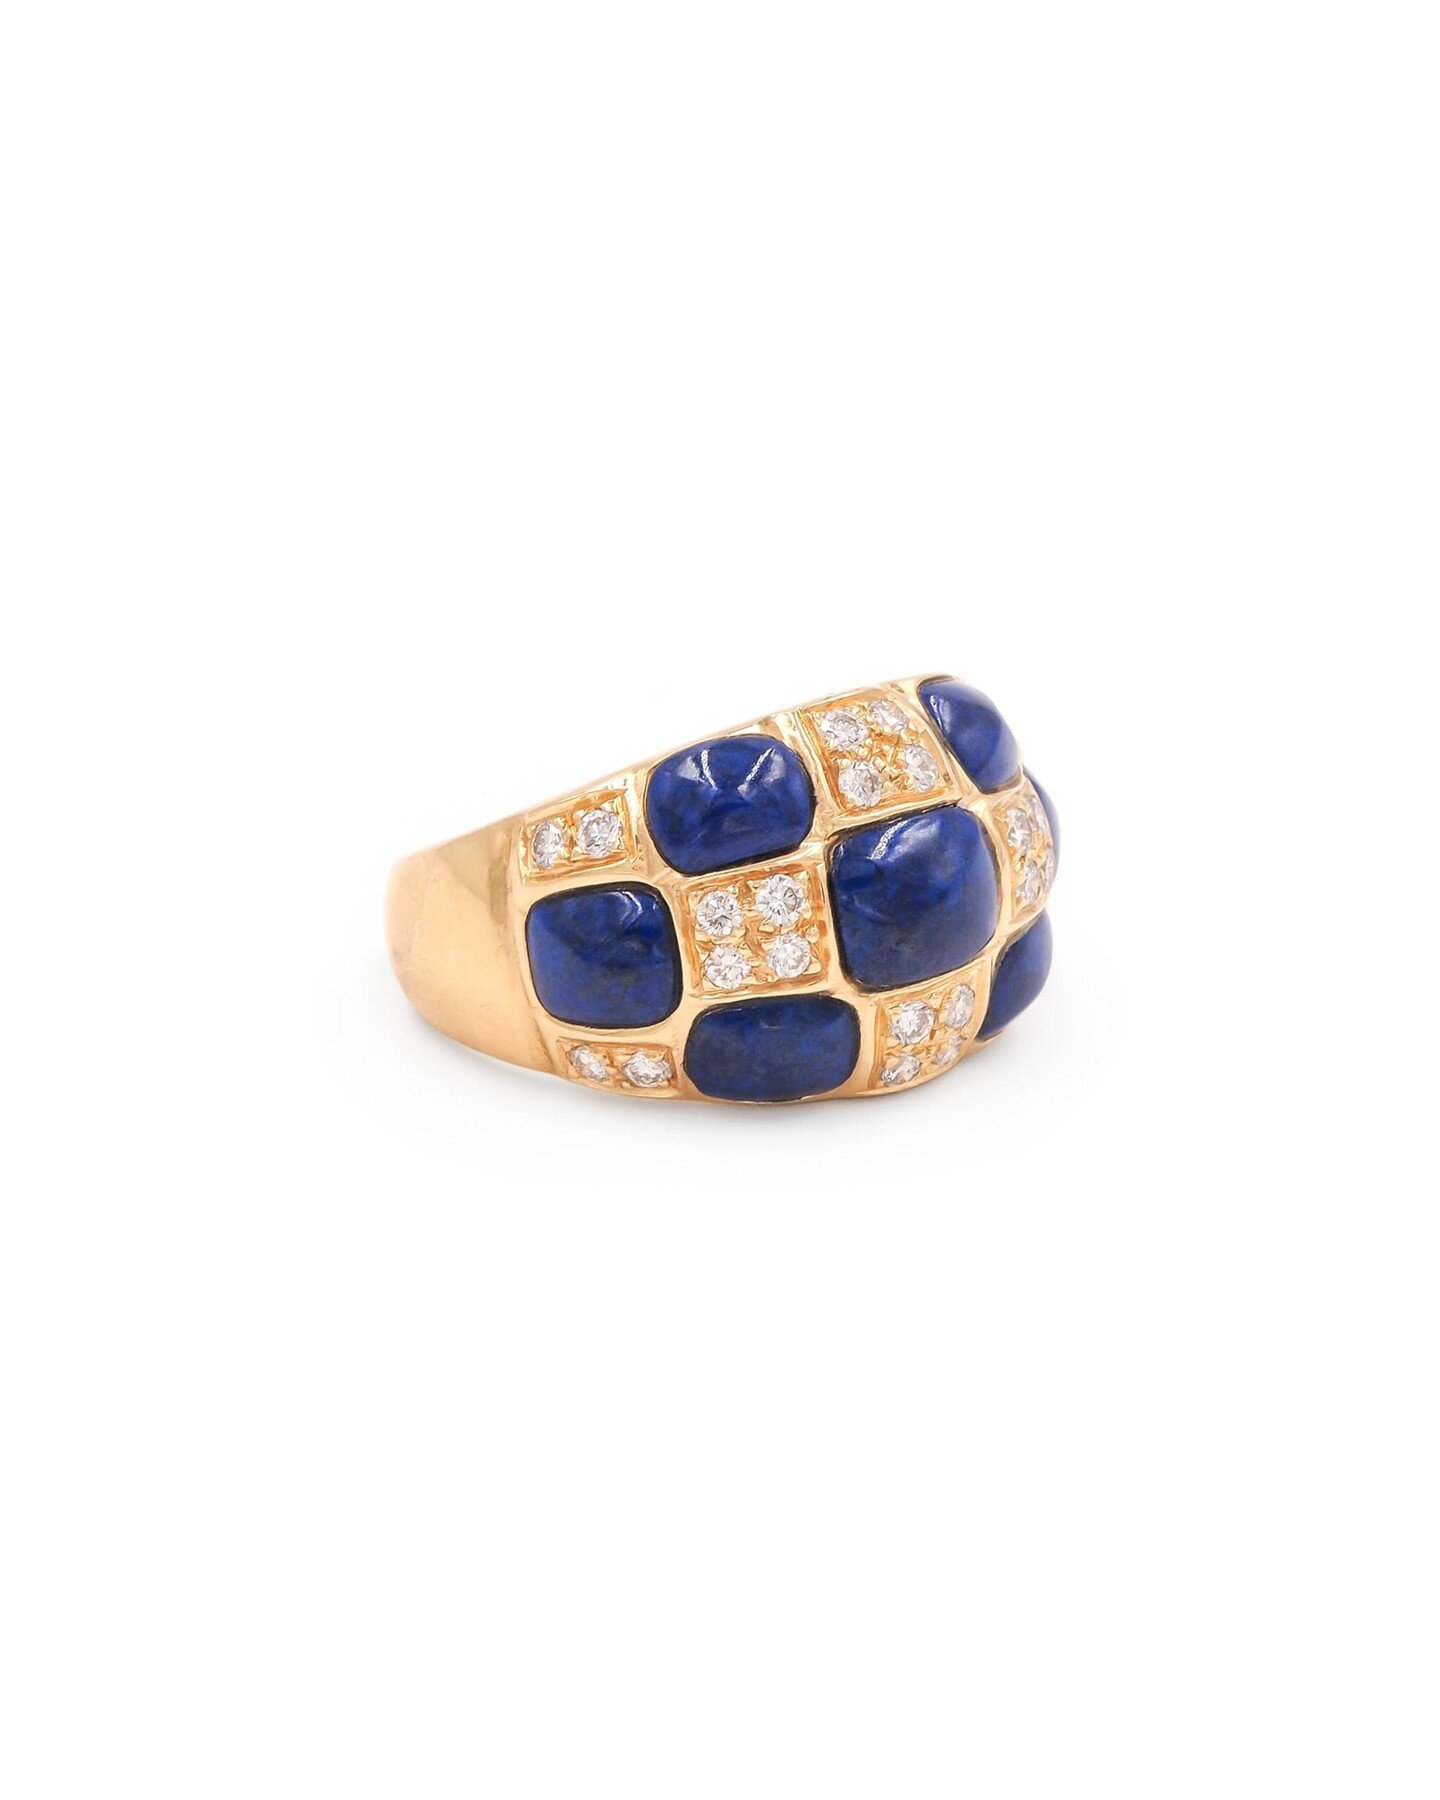 Interesting fact: they say the vintage jewelry you're most drawn to tends to come from the decade your mother had her heyday. Which explains our obsession with this vintage 70s / 80s lapis lazuli and diamond dome checkerboard ring 💙 Click the 🔗 in 